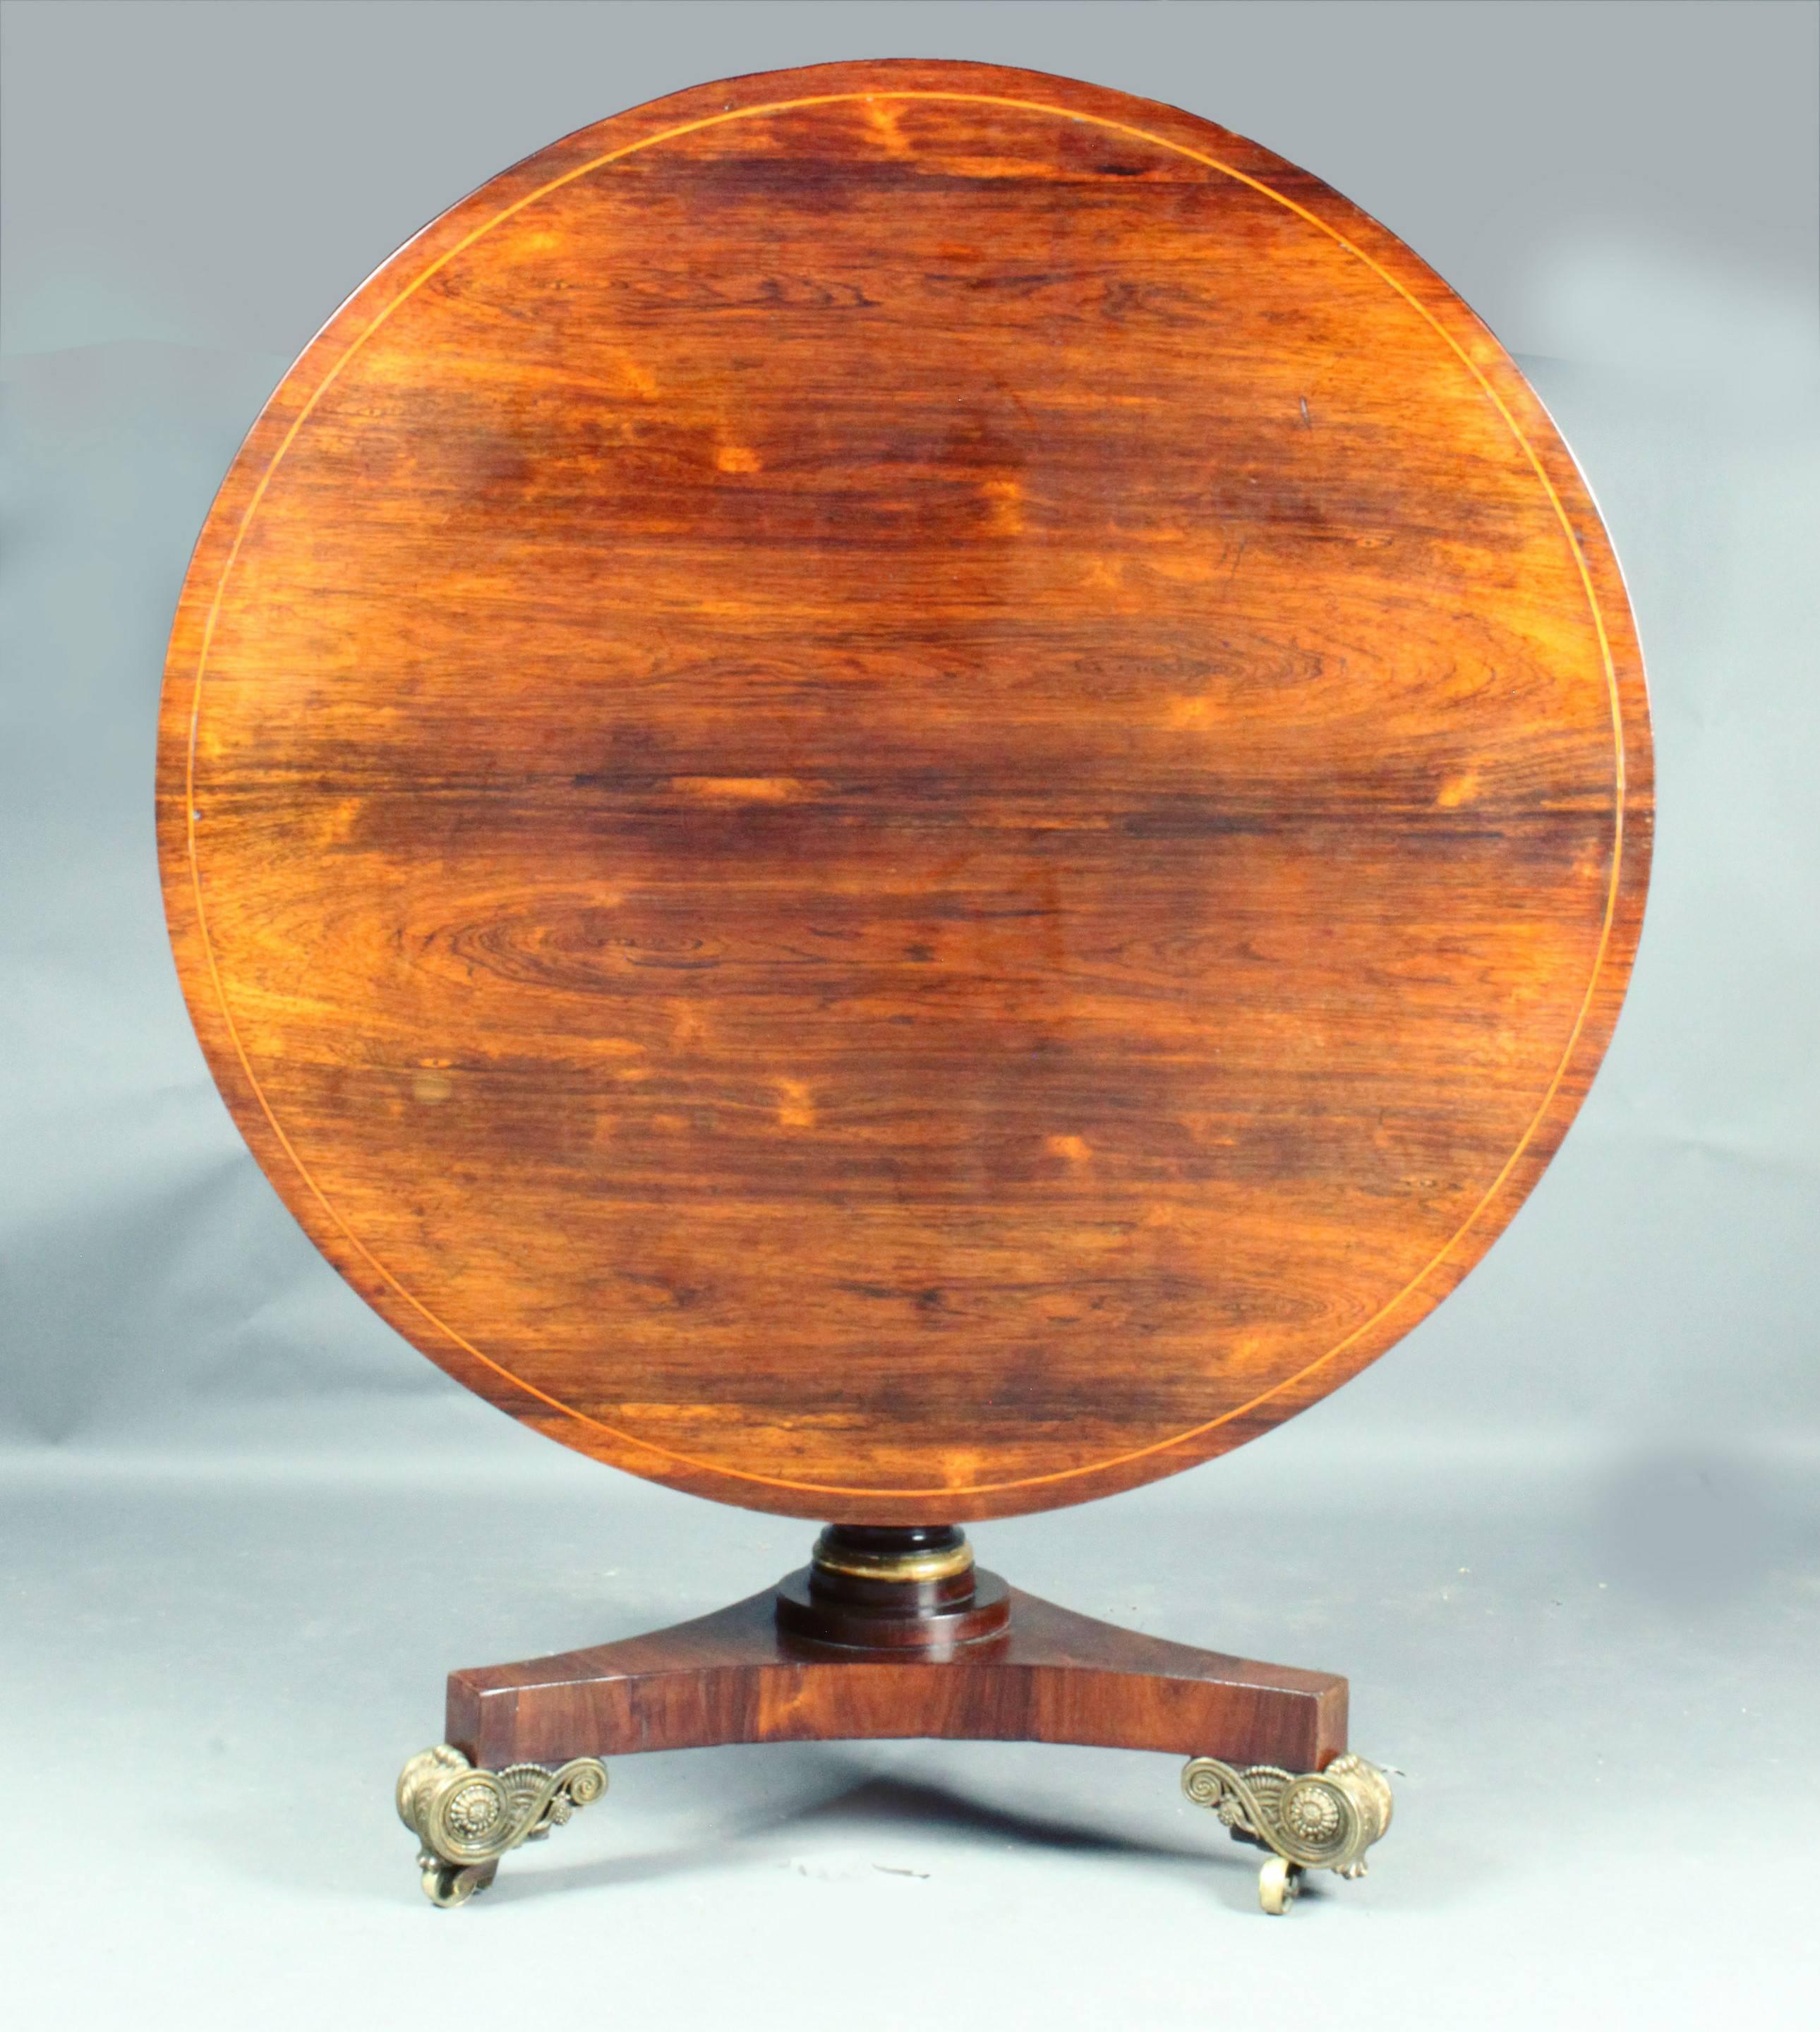 A fine Regency rosewood centre table of a rare small size; handsome stem in simulated rosewood with gilded collar; platform base with elegant scroll feet 